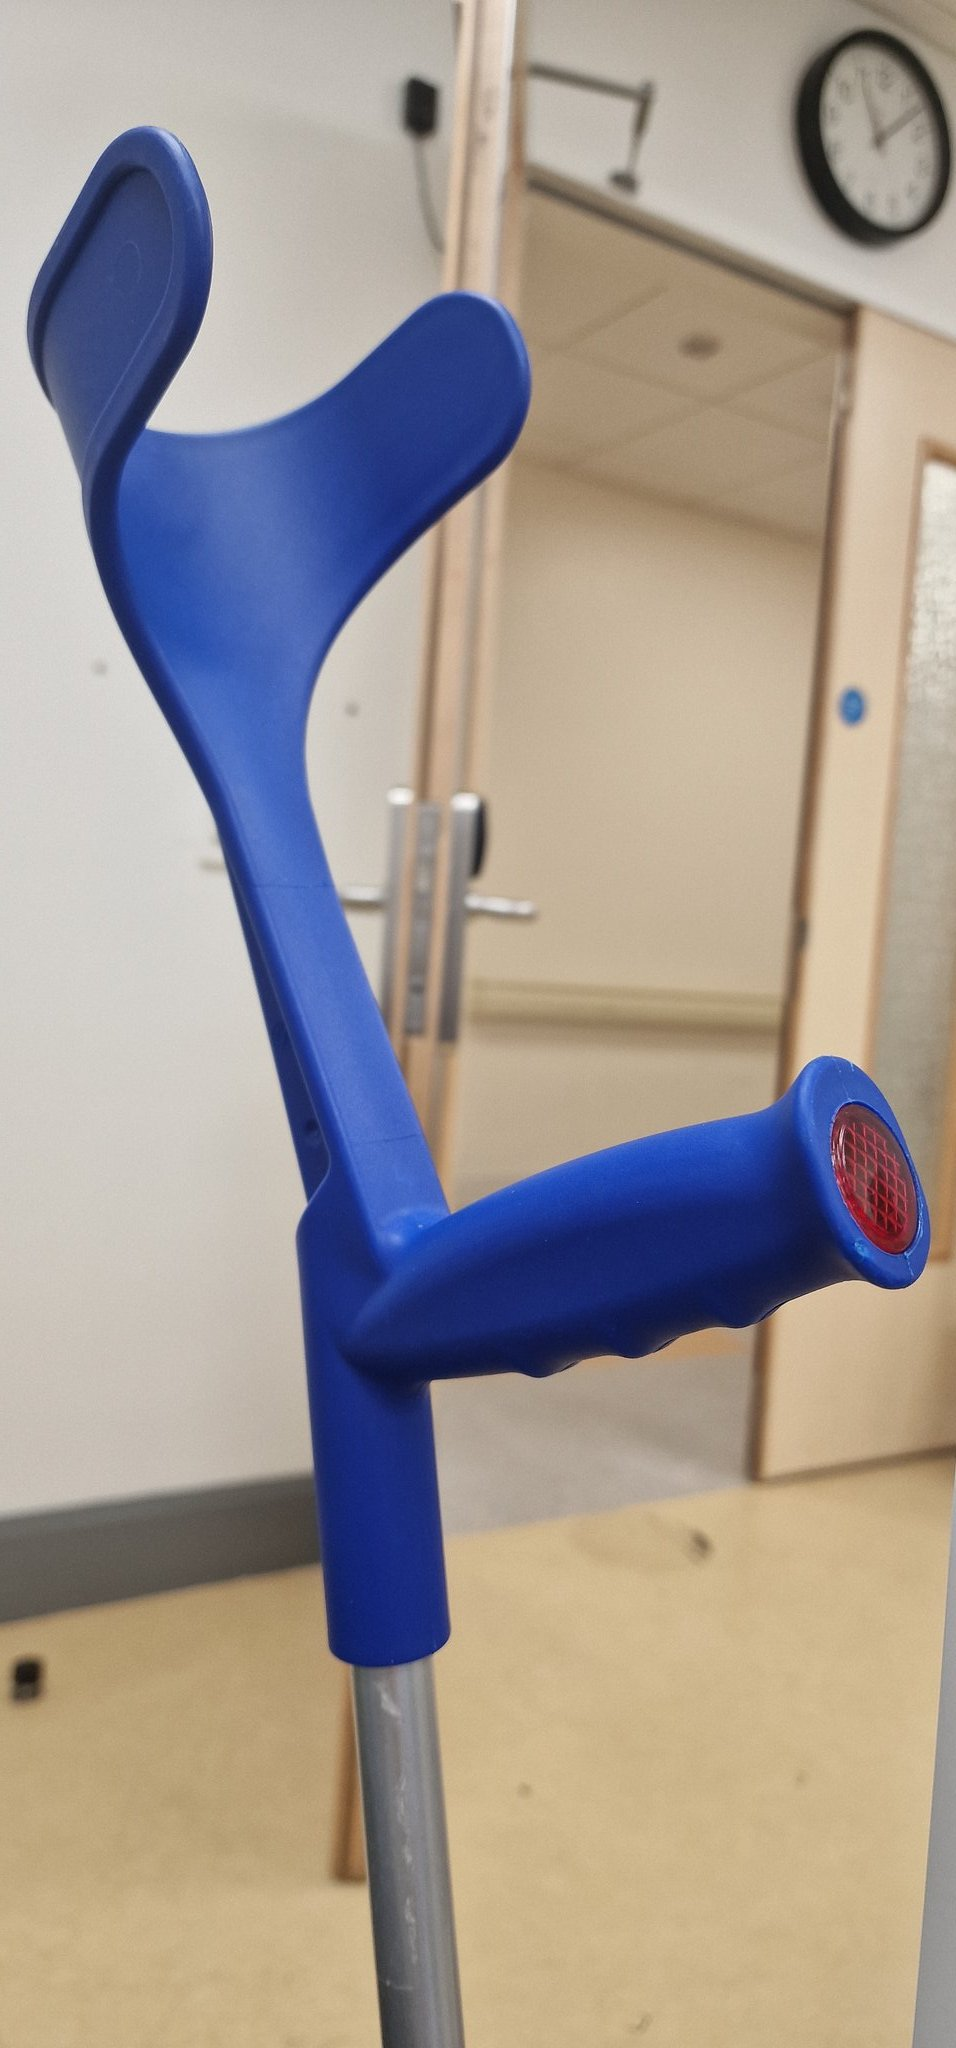 Top of a crutch with blue plastic handles and the door to a hospital waiting room